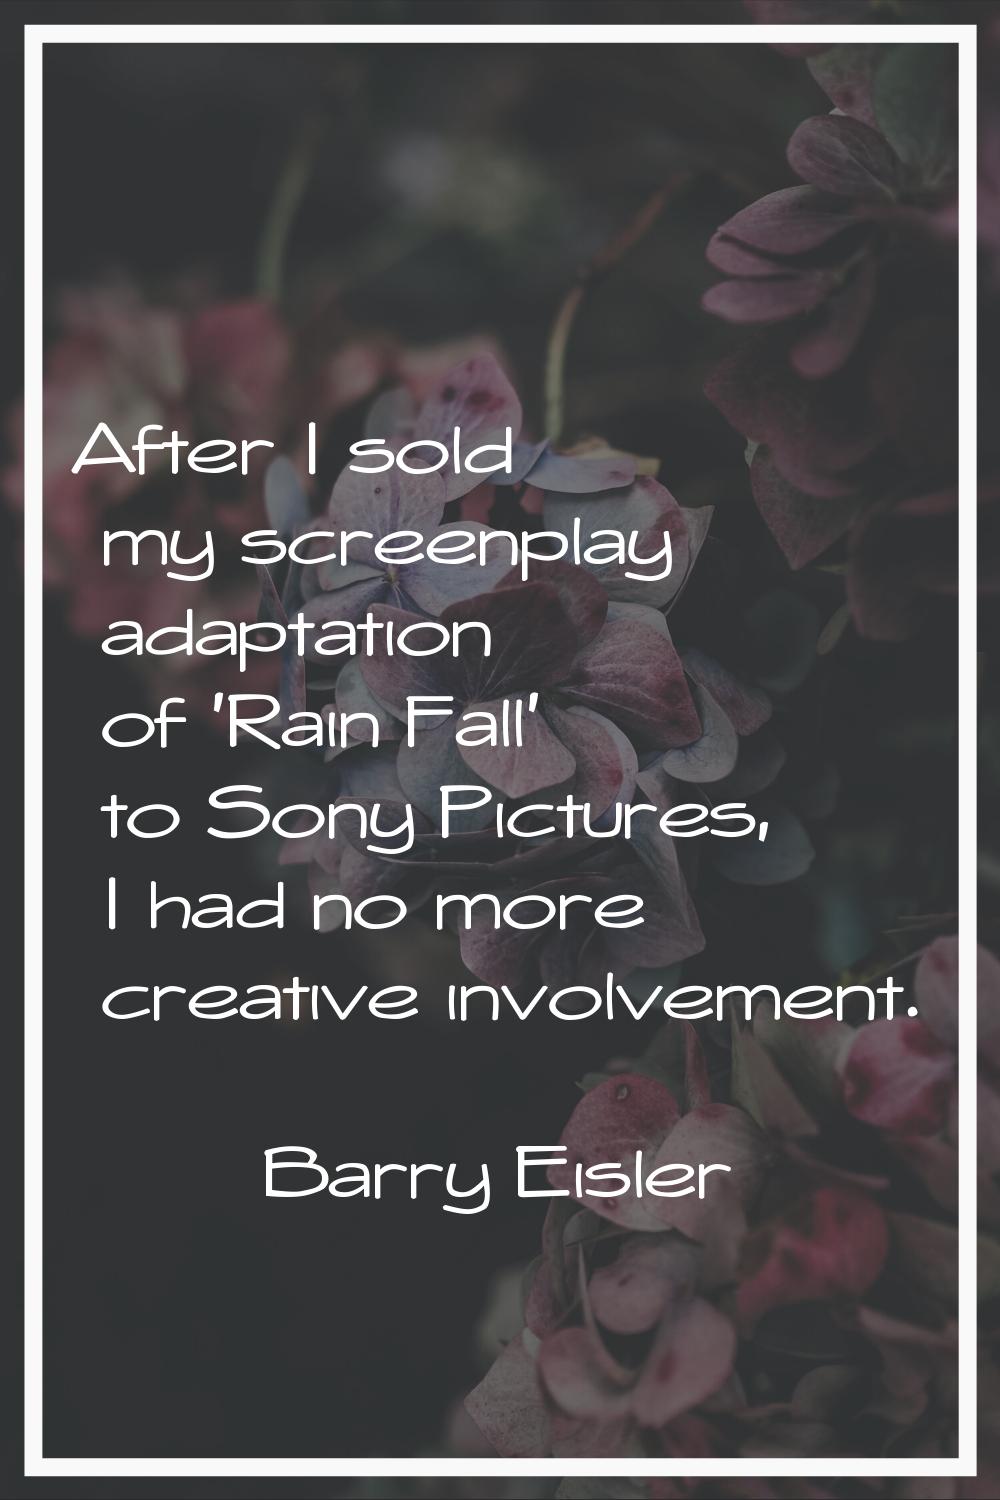 After I sold my screenplay adaptation of 'Rain Fall' to Sony Pictures, I had no more creative invol